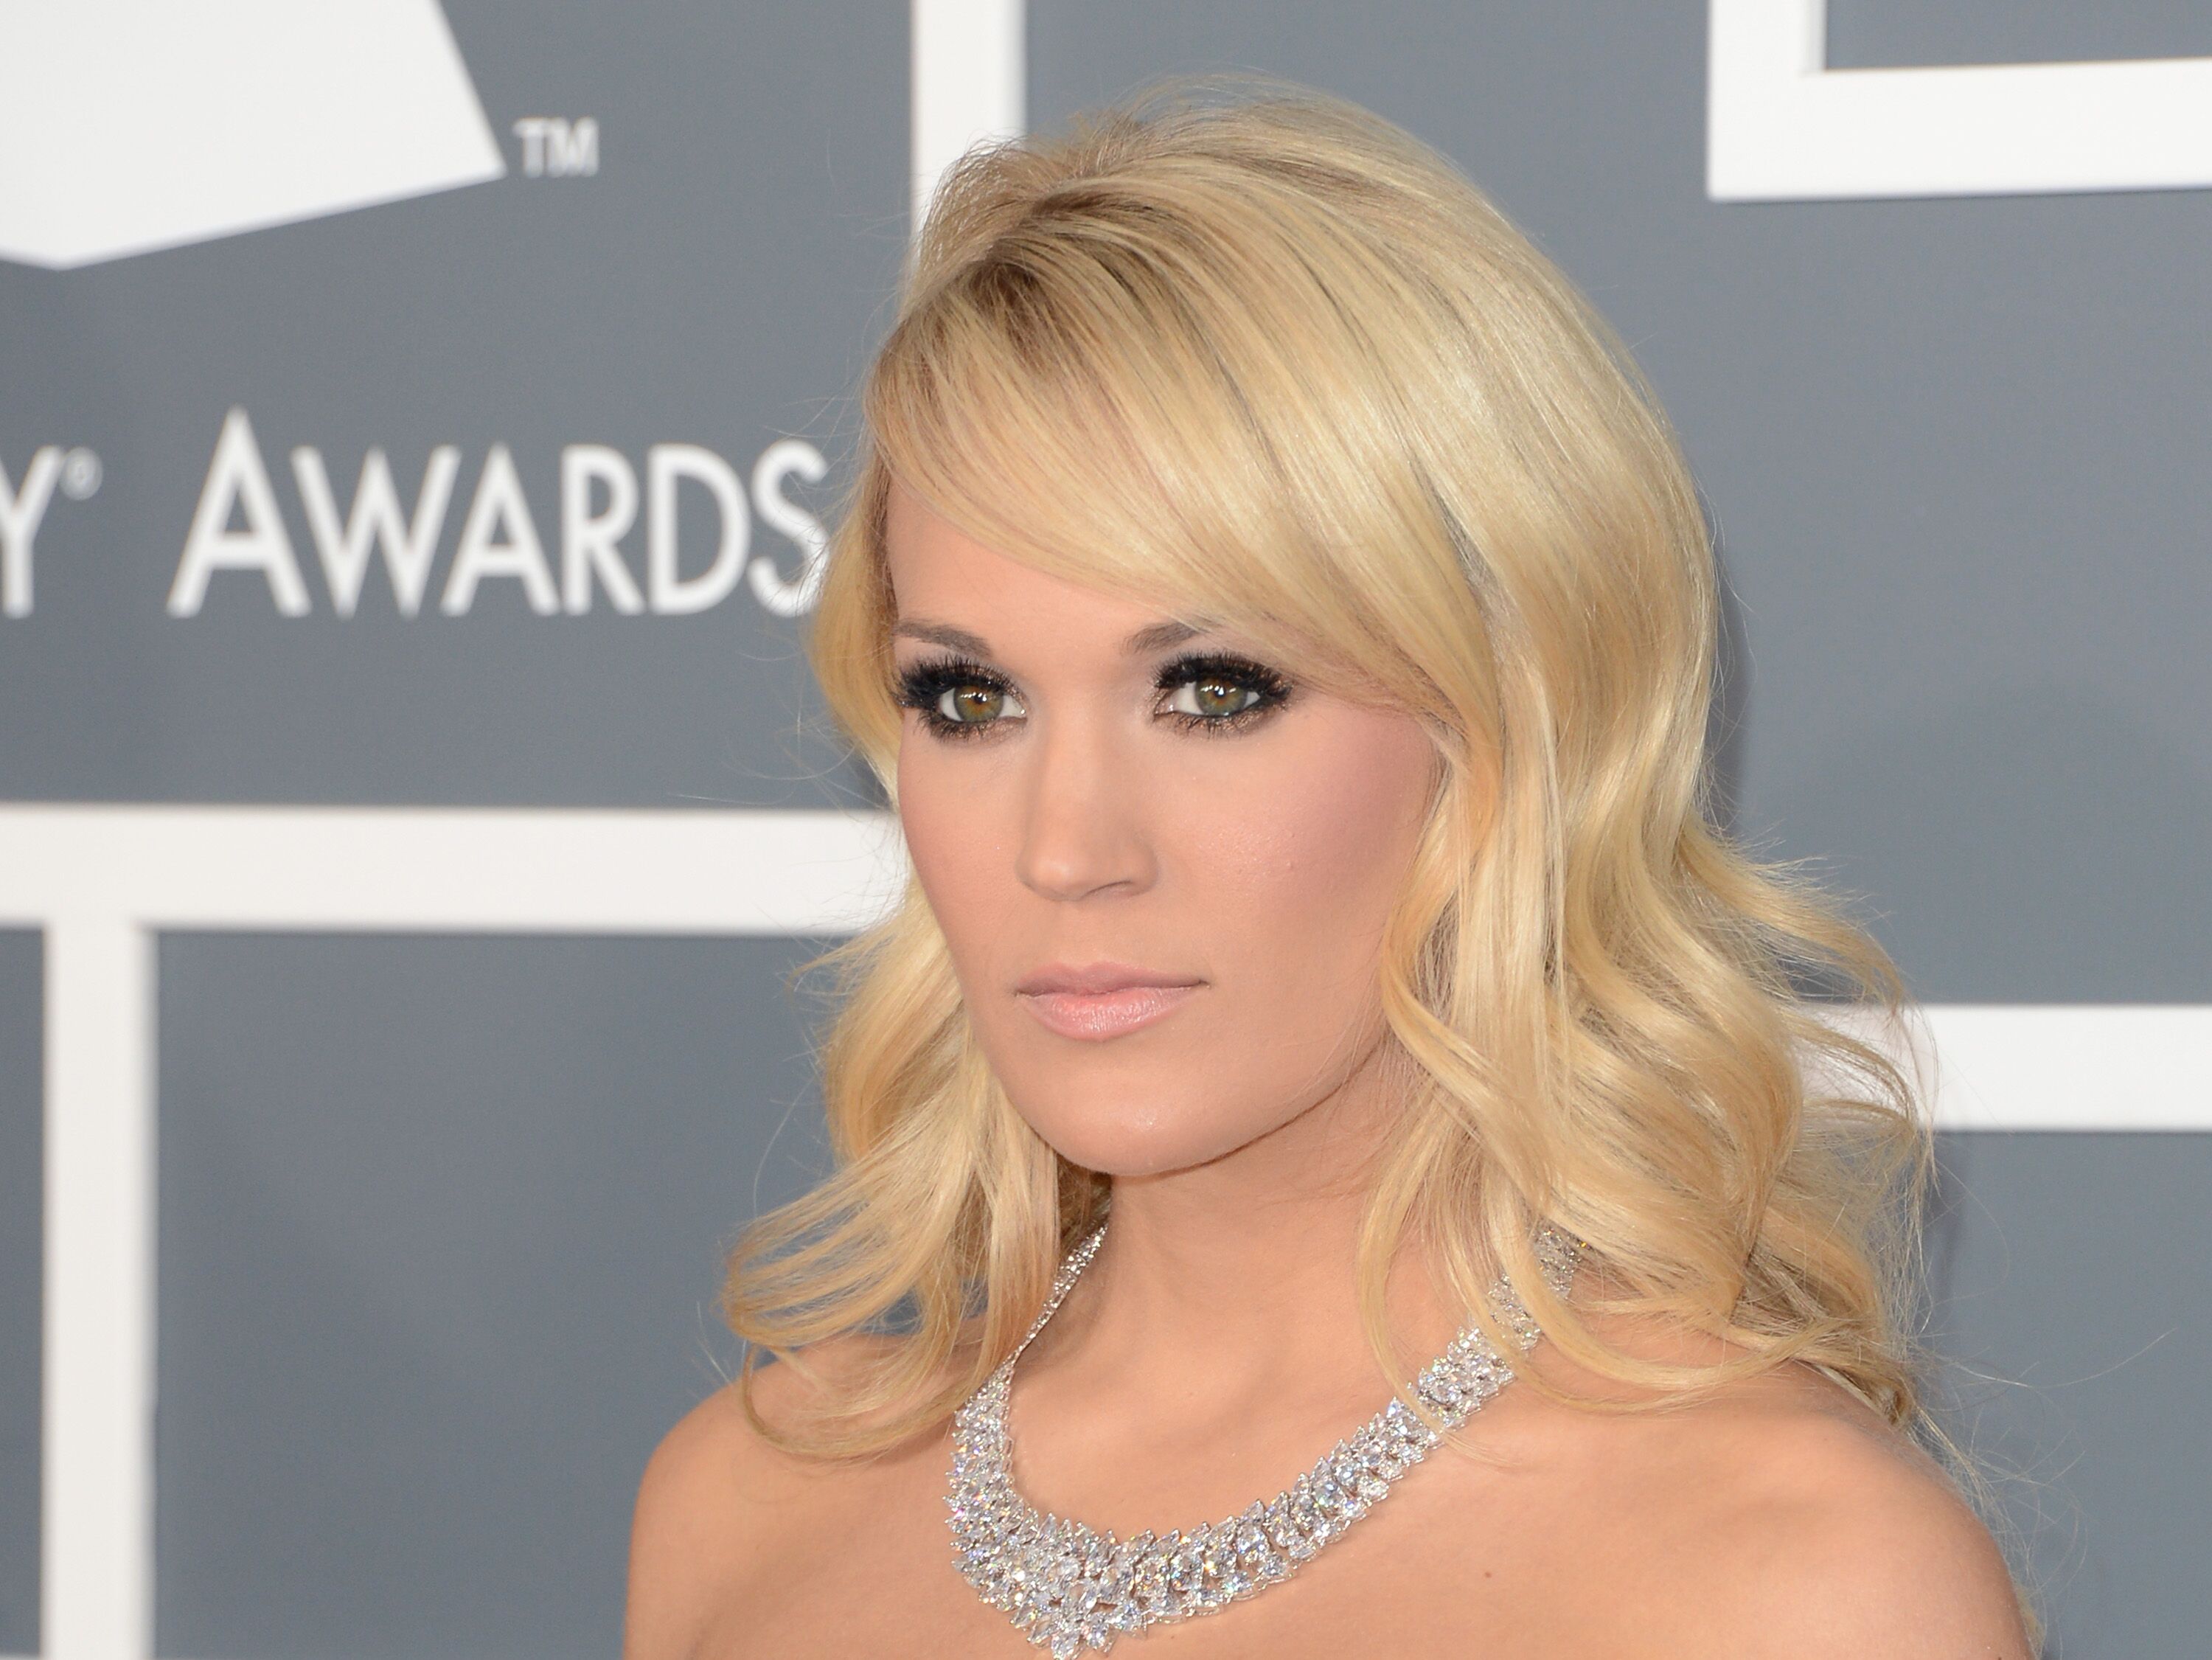 Carrie Underwood arrives at the 55th Annual GRAMMY Awards at Staples Center on February 10, 2013 in Los Angeles, California | Photo: Getty Images